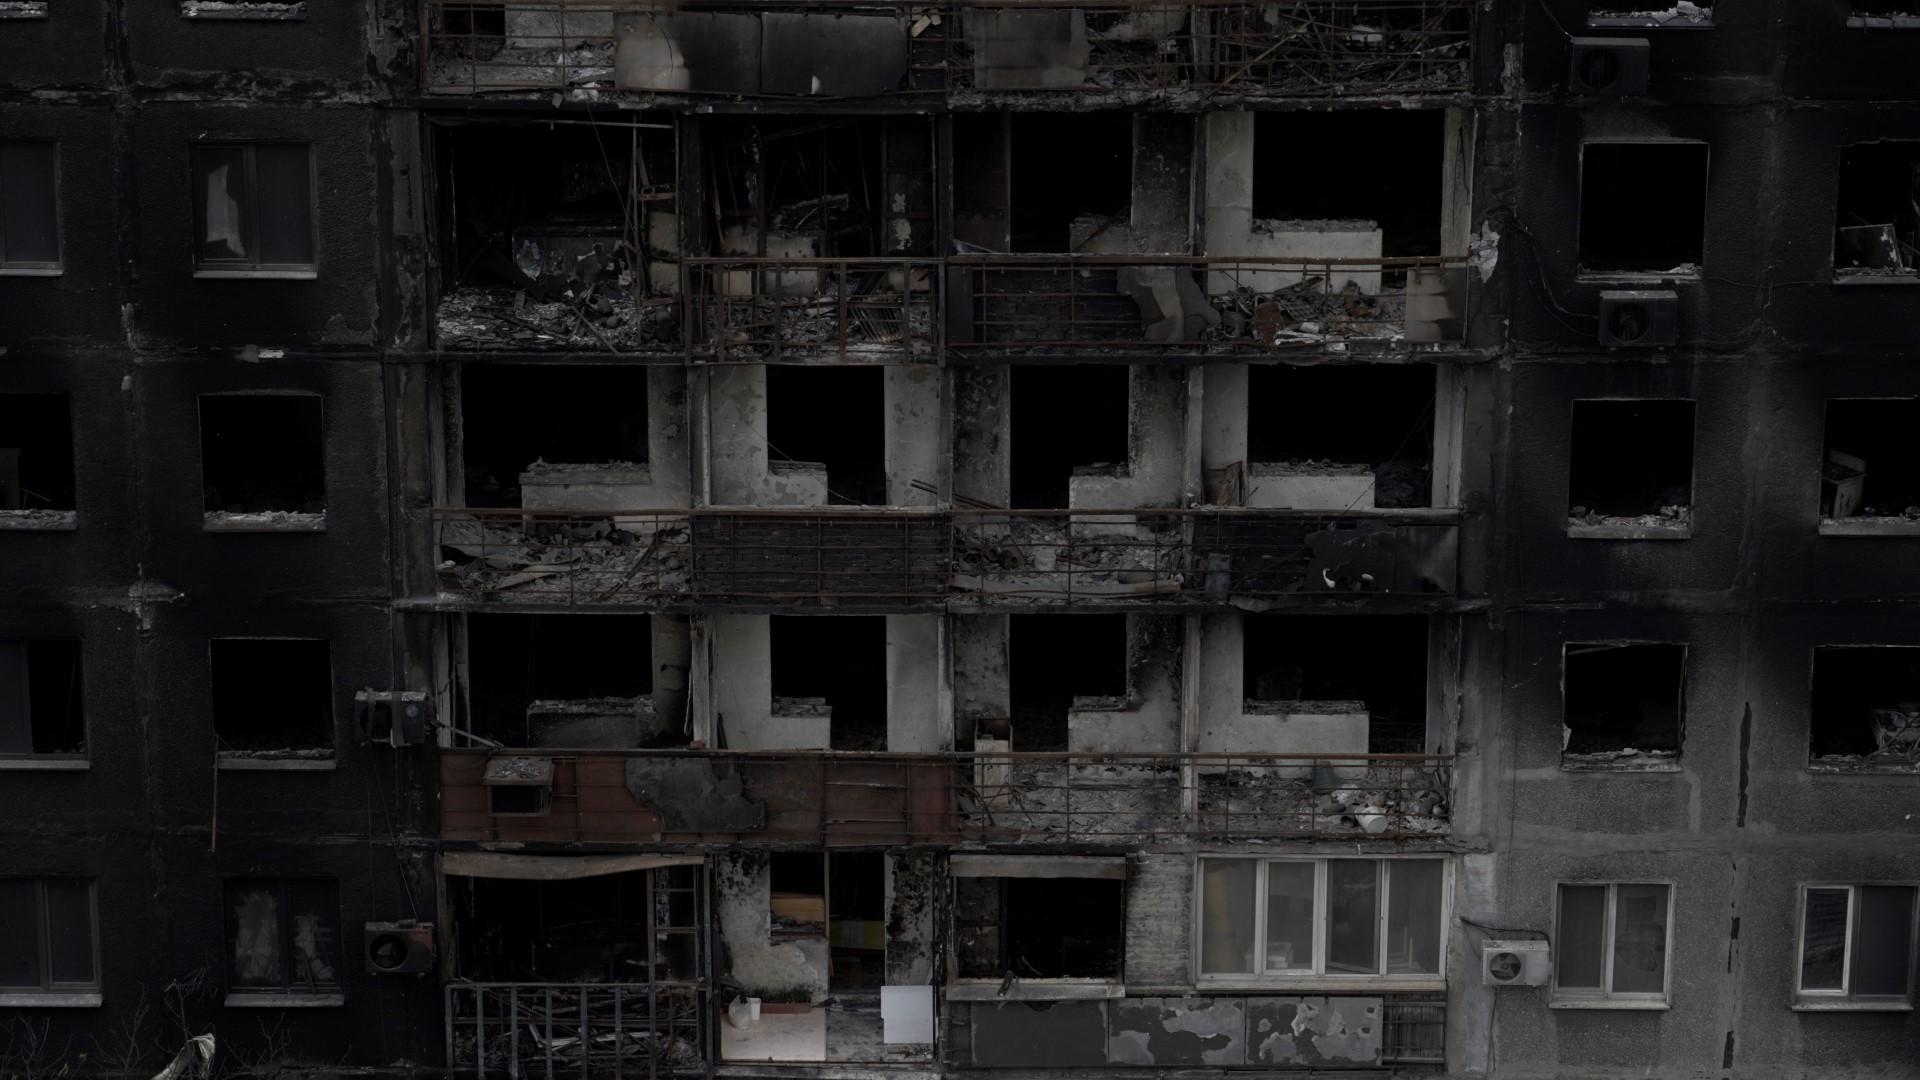 A view shows the city of Mariupol on May 10, amid the ongoing Russian military action in Ukraine. Photo: AFP